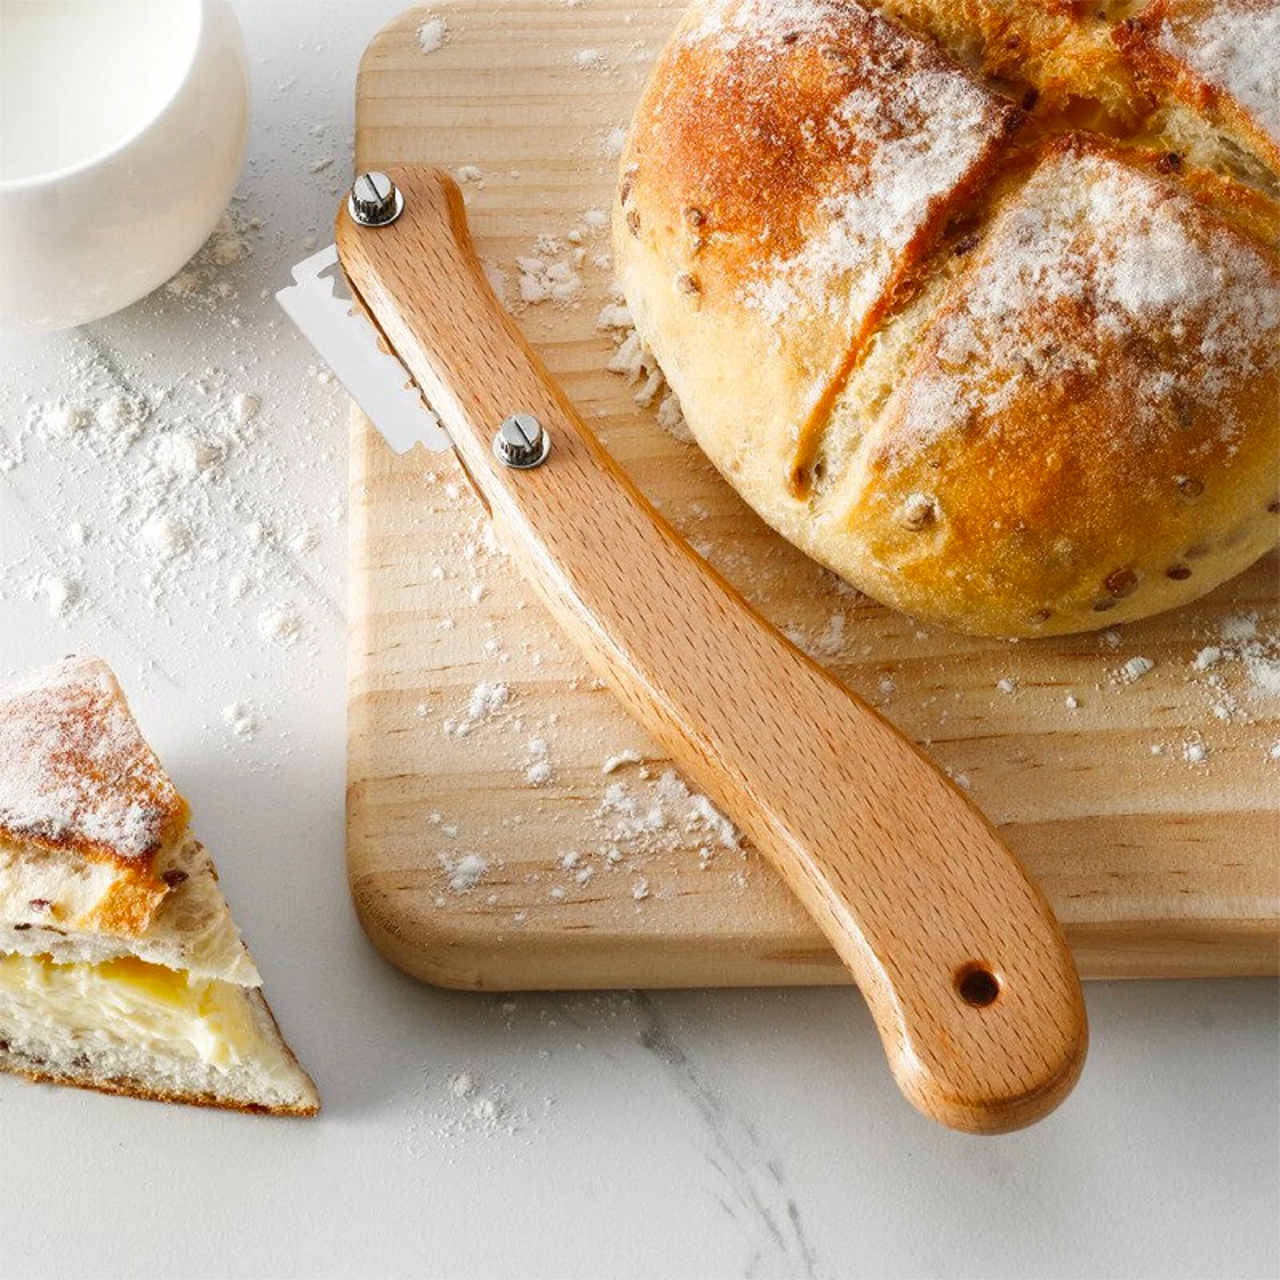 Great Gift for Bakers - Bread Lame, Double-sided Stainless Steel Blades, Dough Making Slasher Tools, Baking Sourdough